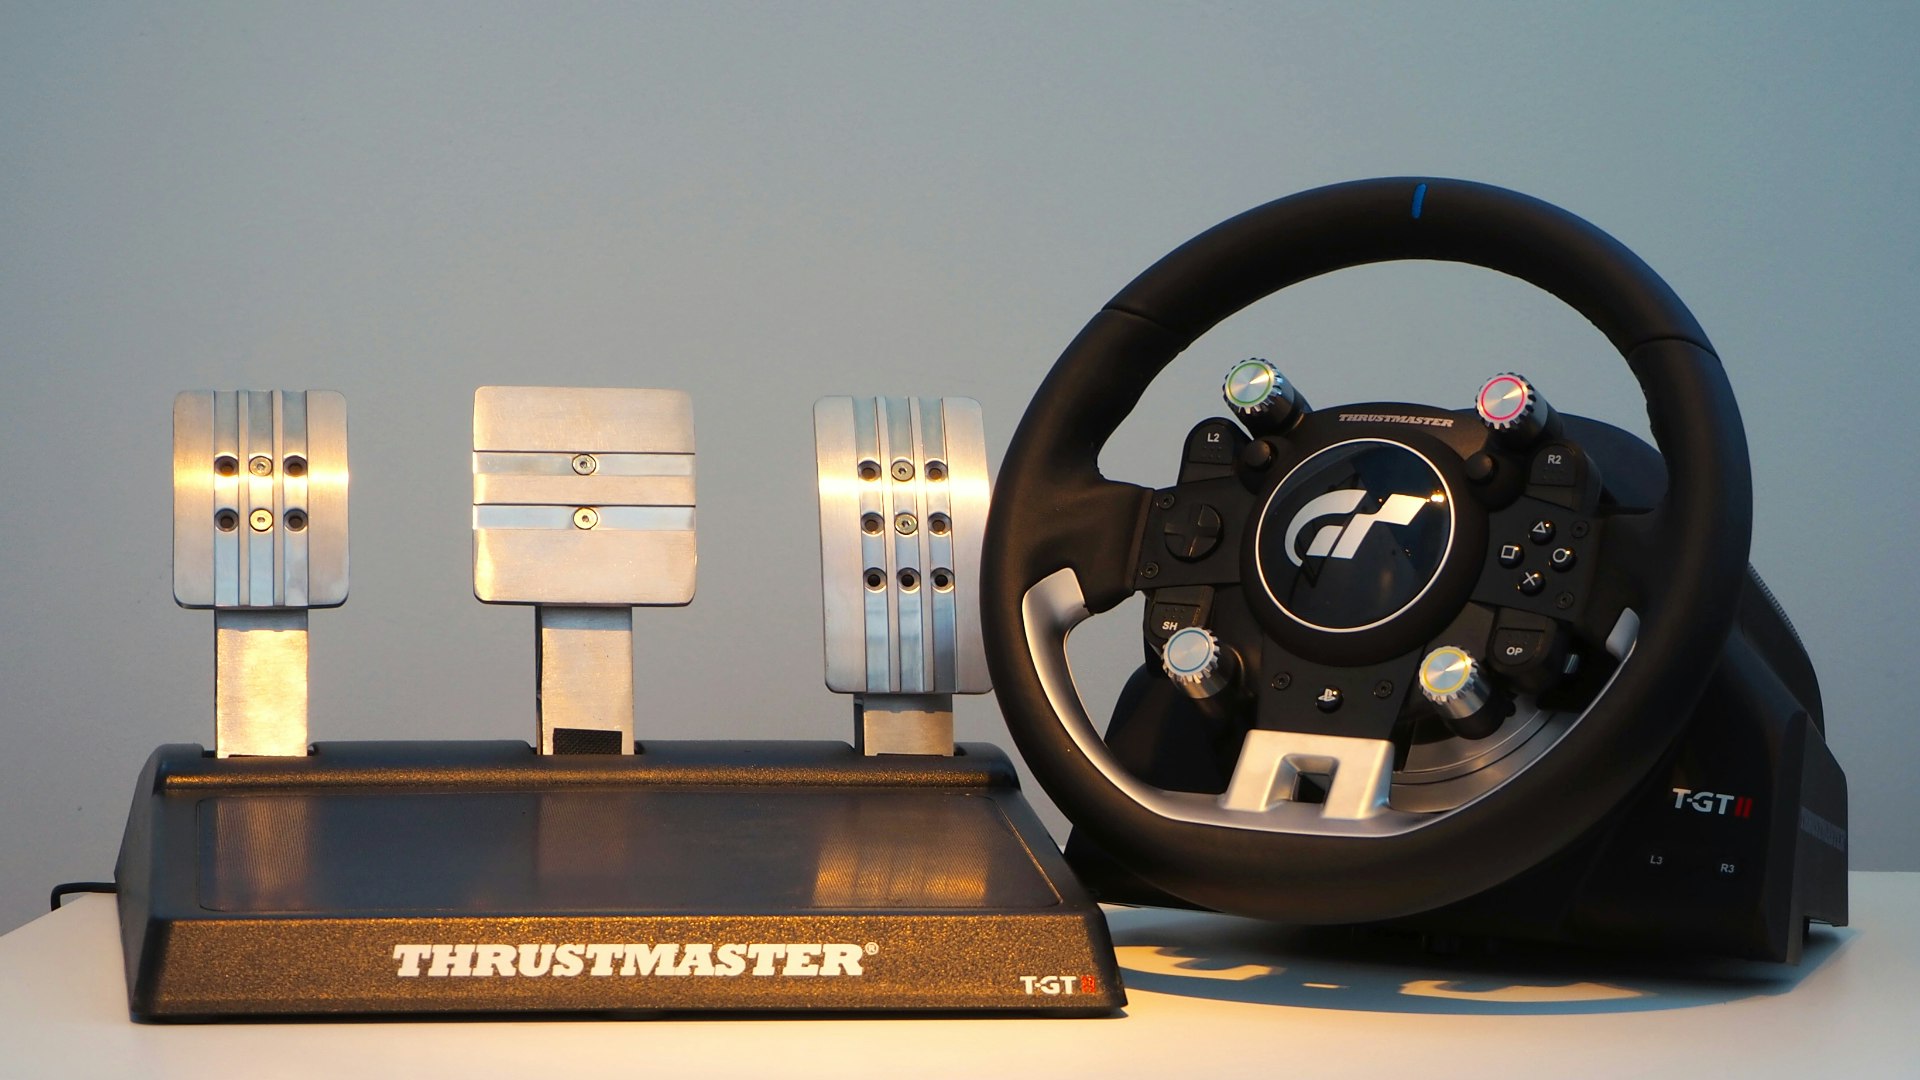 Thrustmaster T-GT II Review: Tested On GT7 And Other Racing Games